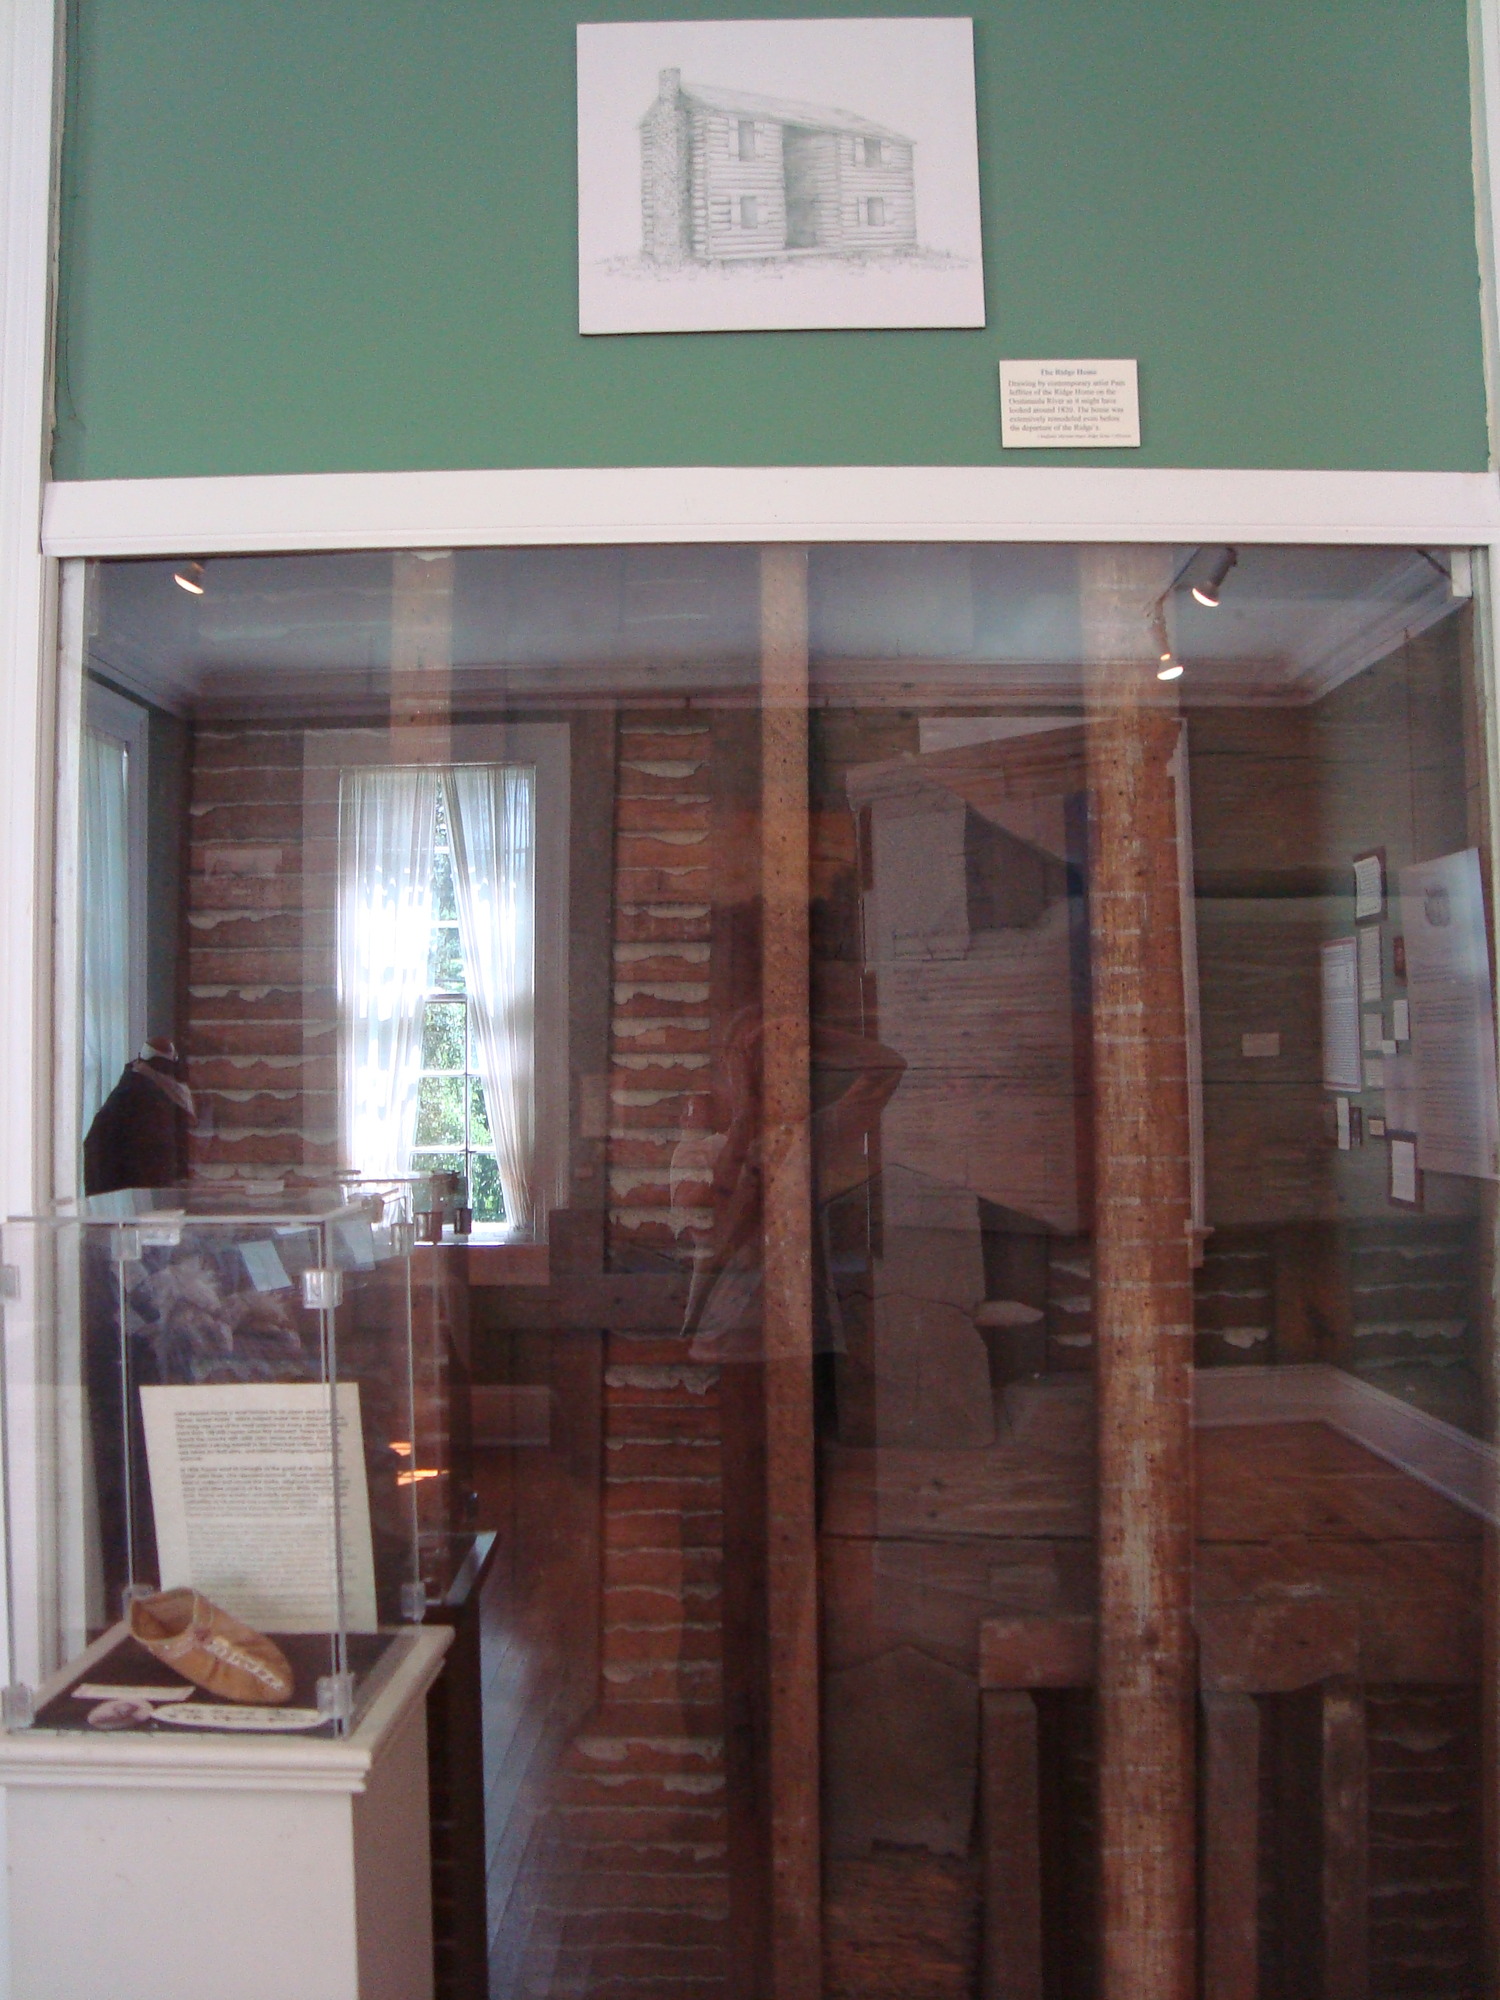 An exhibit enclosed by glass at the Chieftains Museum, Major Ridge Home in Rome, Georgia